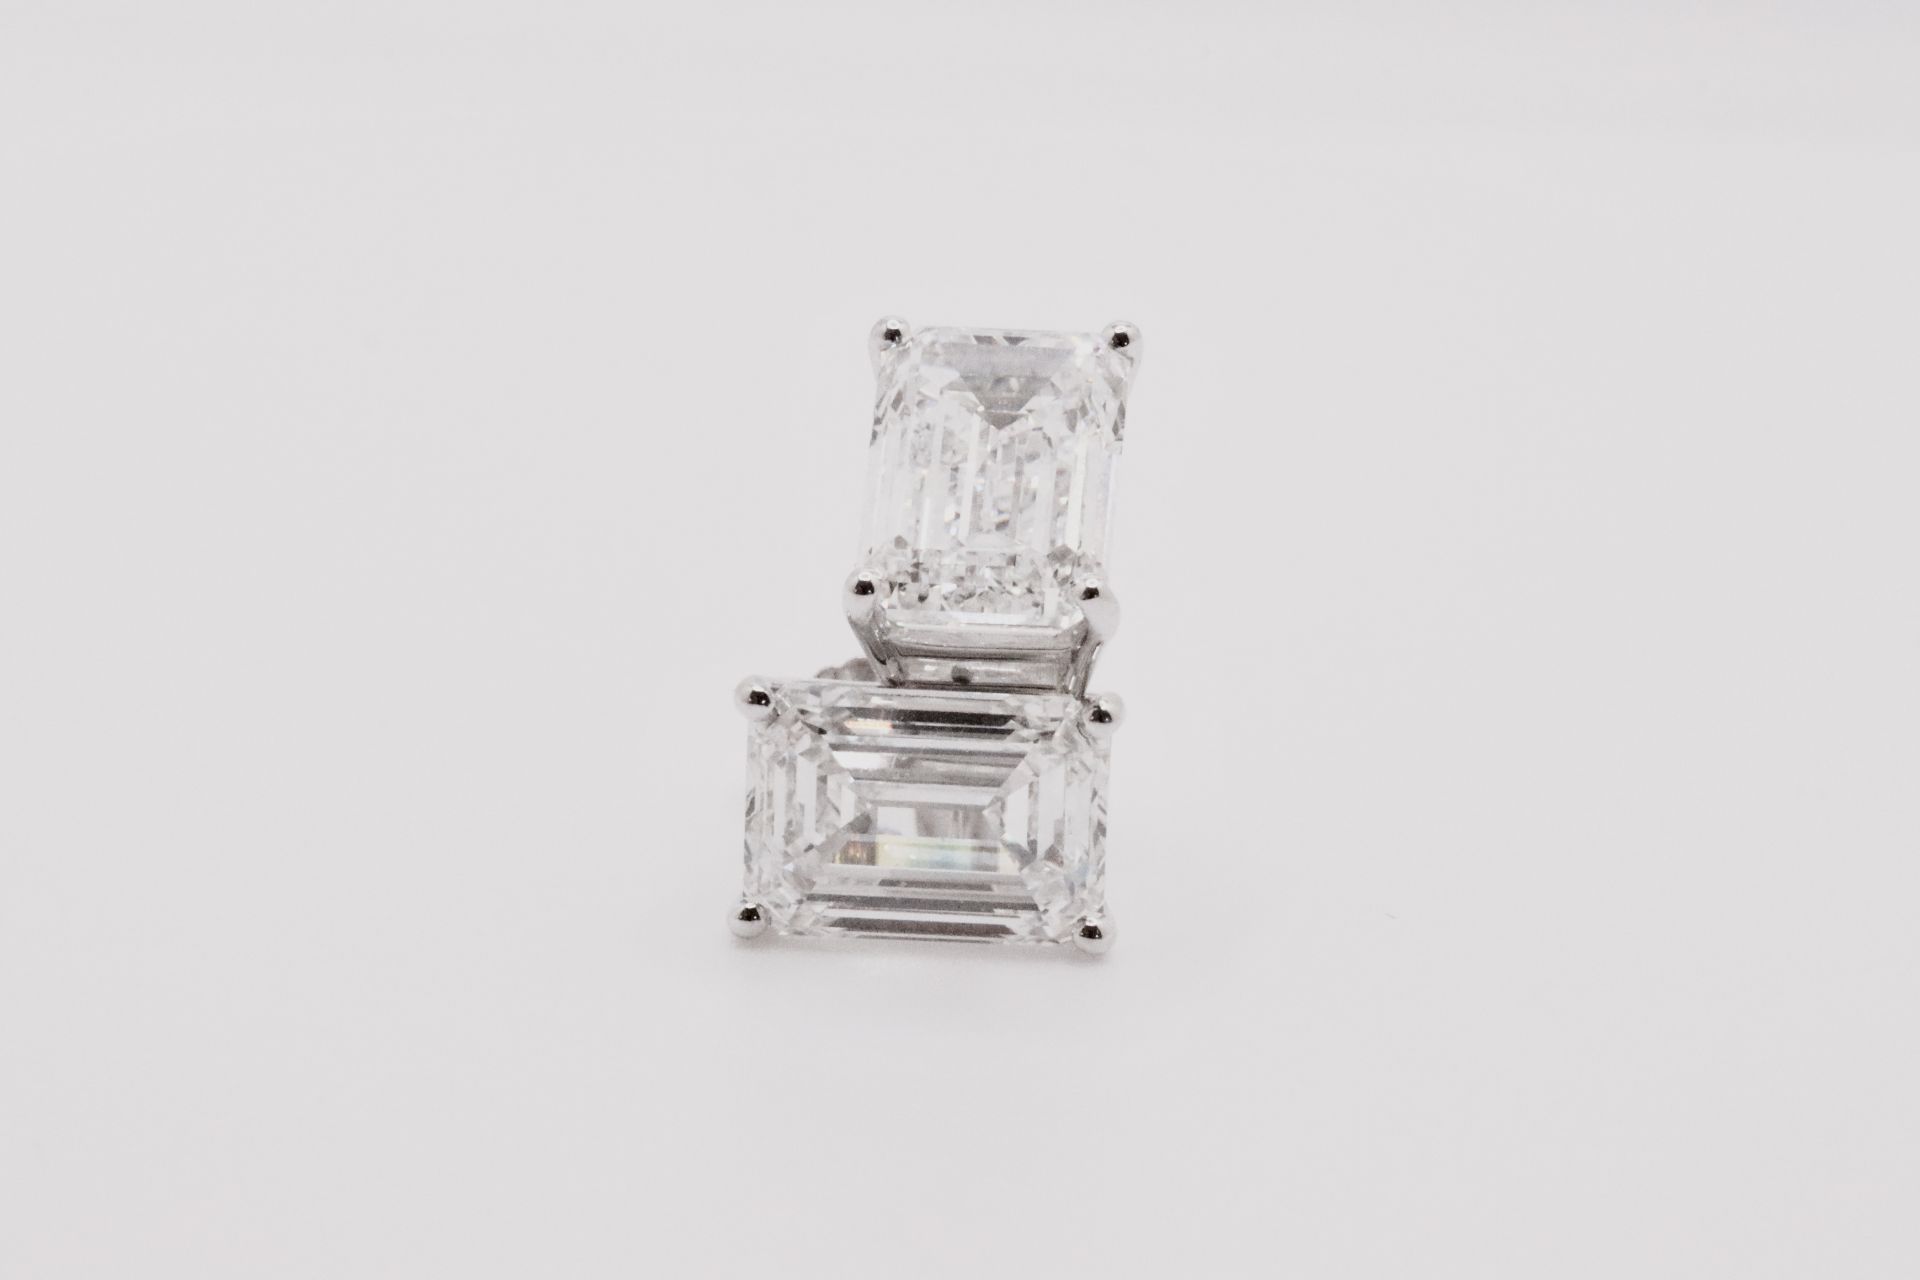 Emerald Cut 4.00 Carat Natural Diamond Earrings 18kt White Gold - Colour G - SI Clarity- GIA